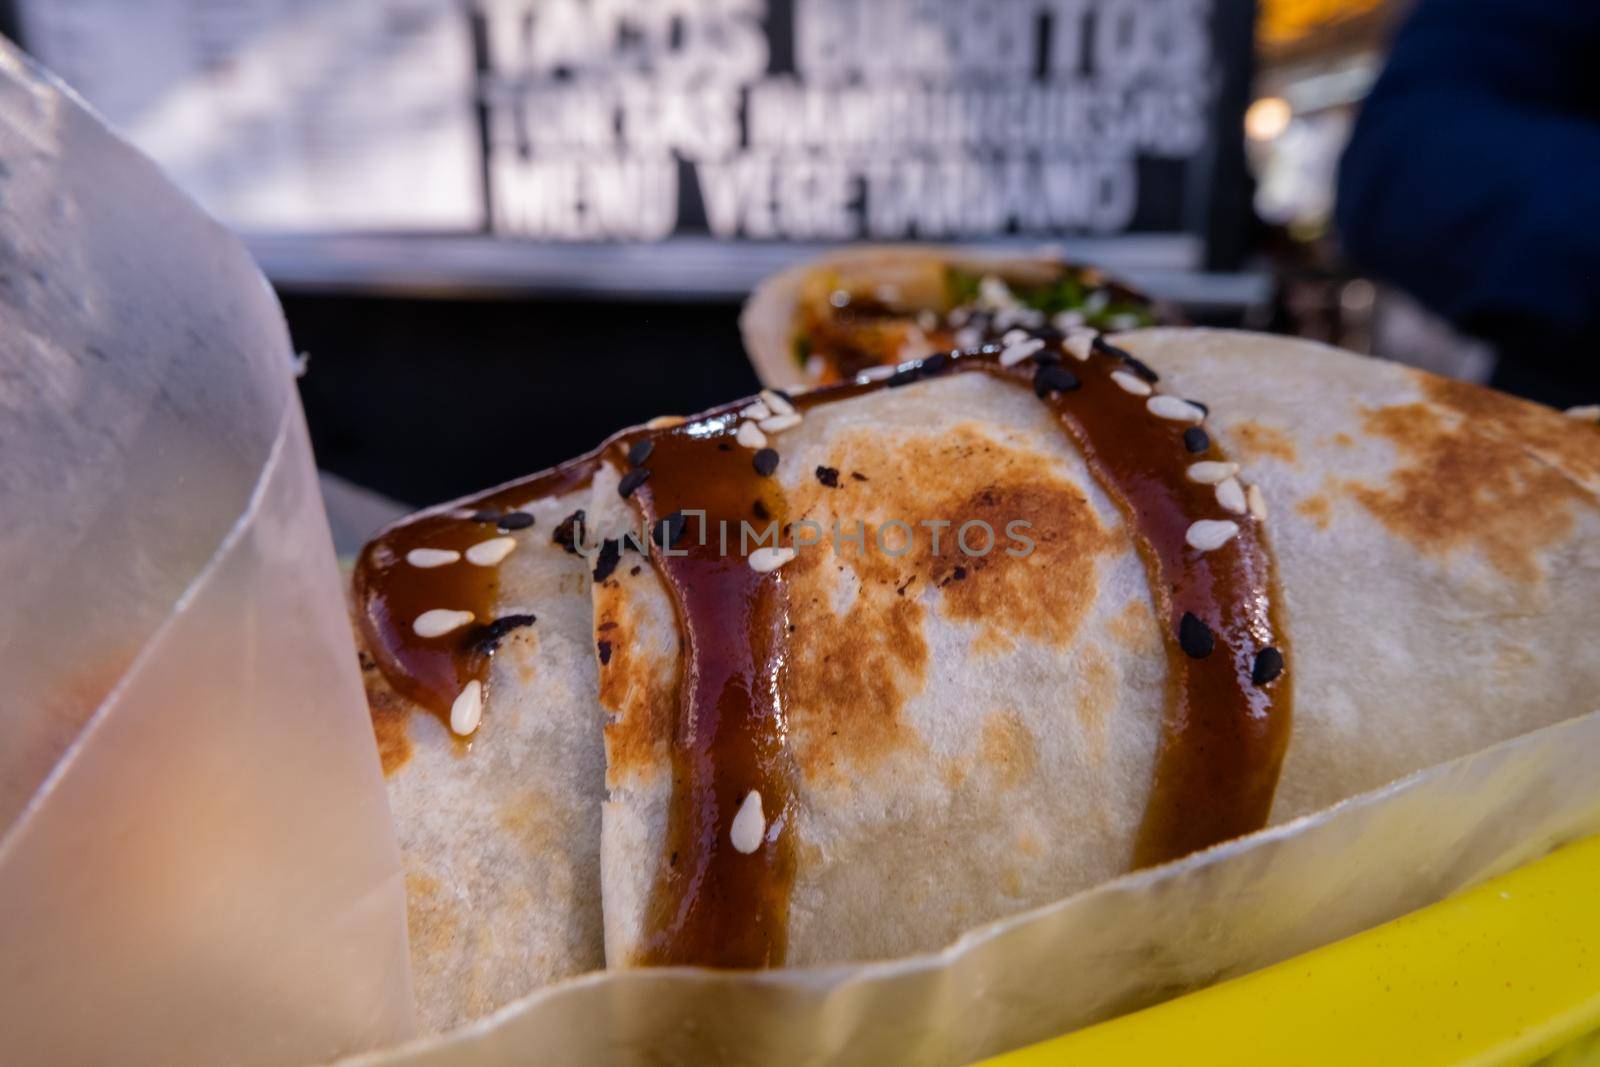 Two vegetarian burritos covered with sauce and seeds with blurry background. Vegan Mexican meal up-close with blurry food truck as background. Traditional Mexican cuisine